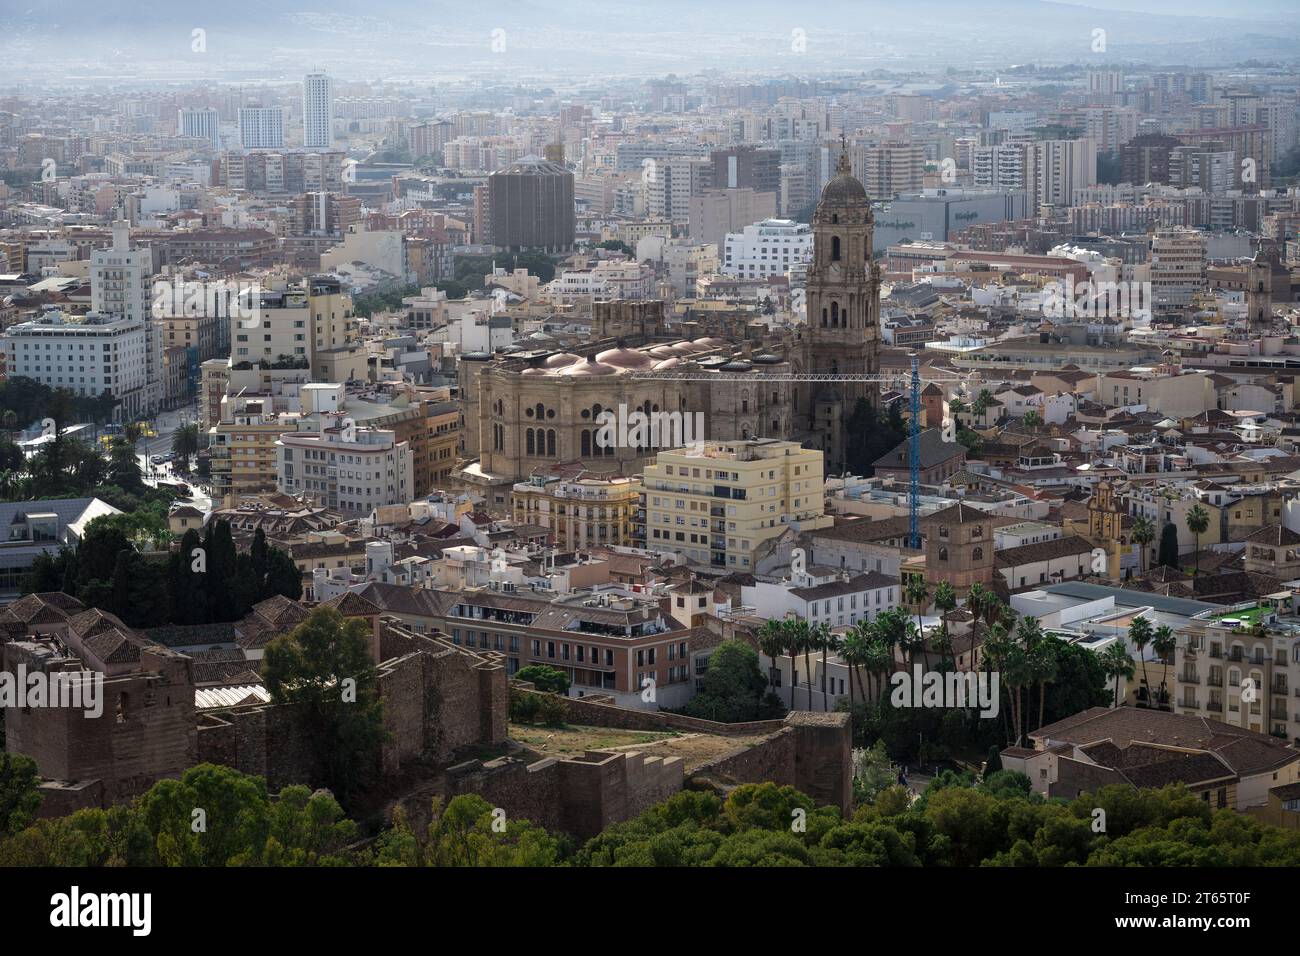 Málaga, Spain - Nov 27 2022: Aerial view of Malaga center with the cathedral and residential buildings Stock Photo